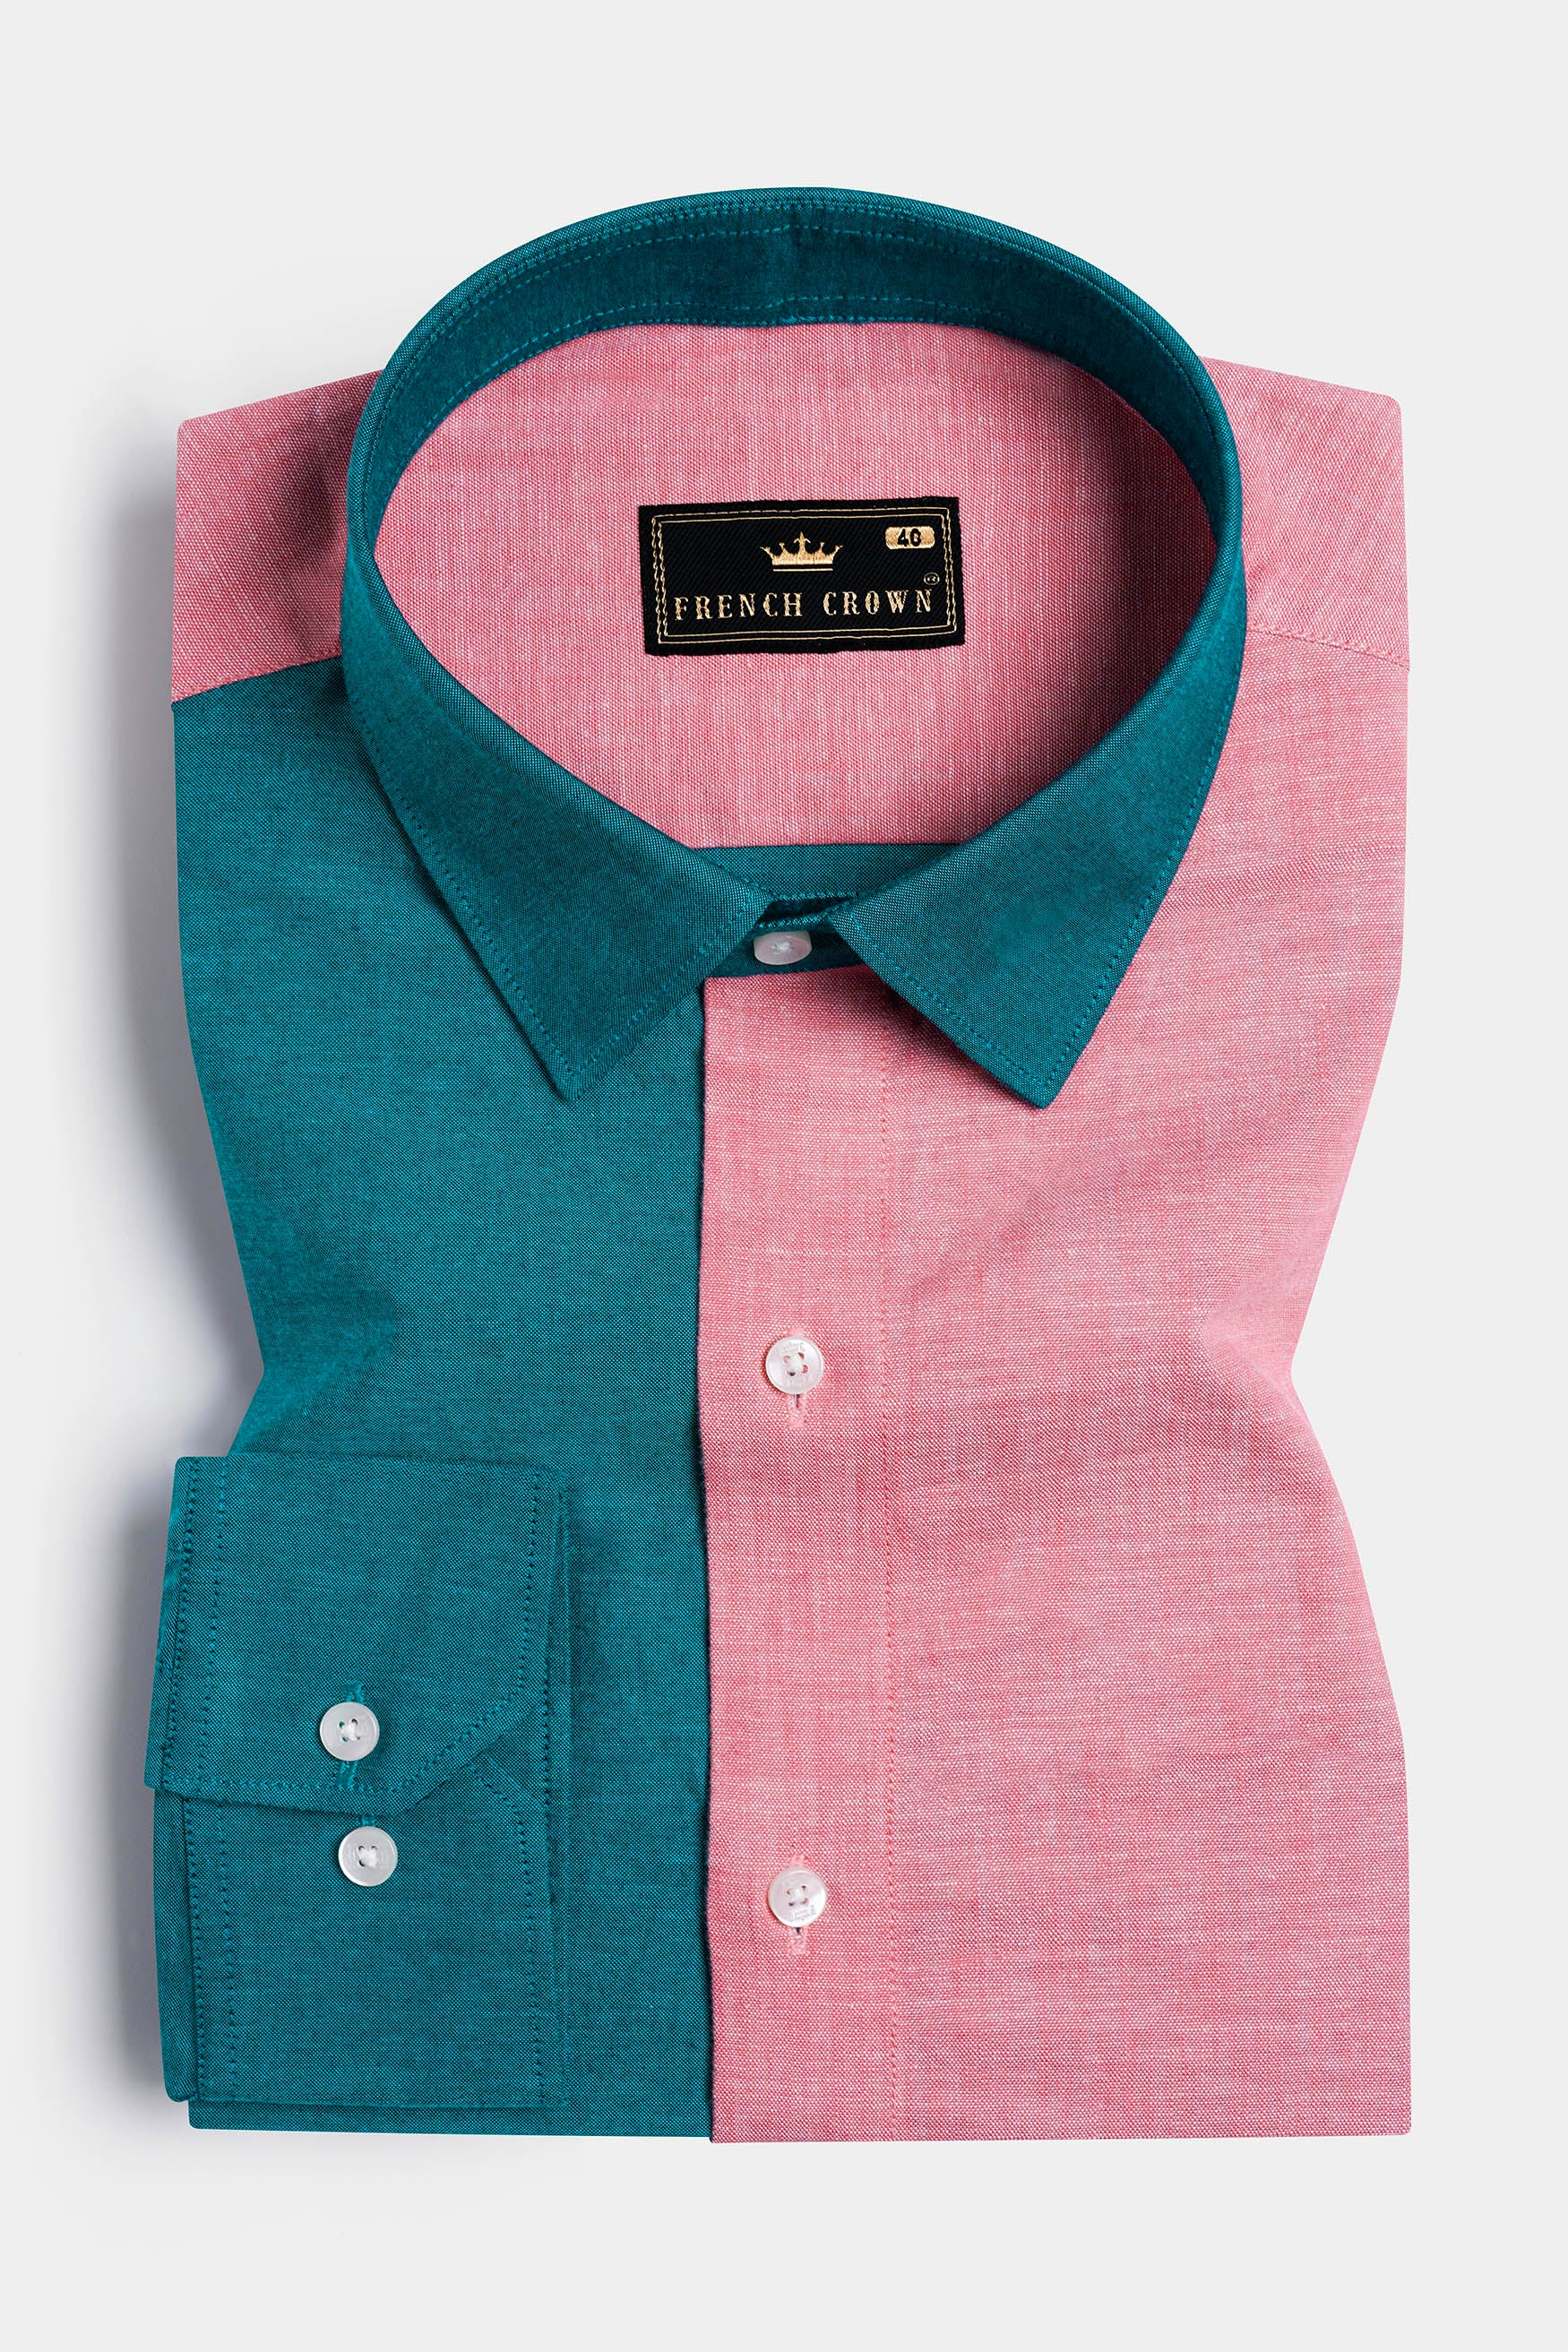 Sherpa Blue and Sunglo Pink Tribal Embroidered Royal Oxford Designer Shirt